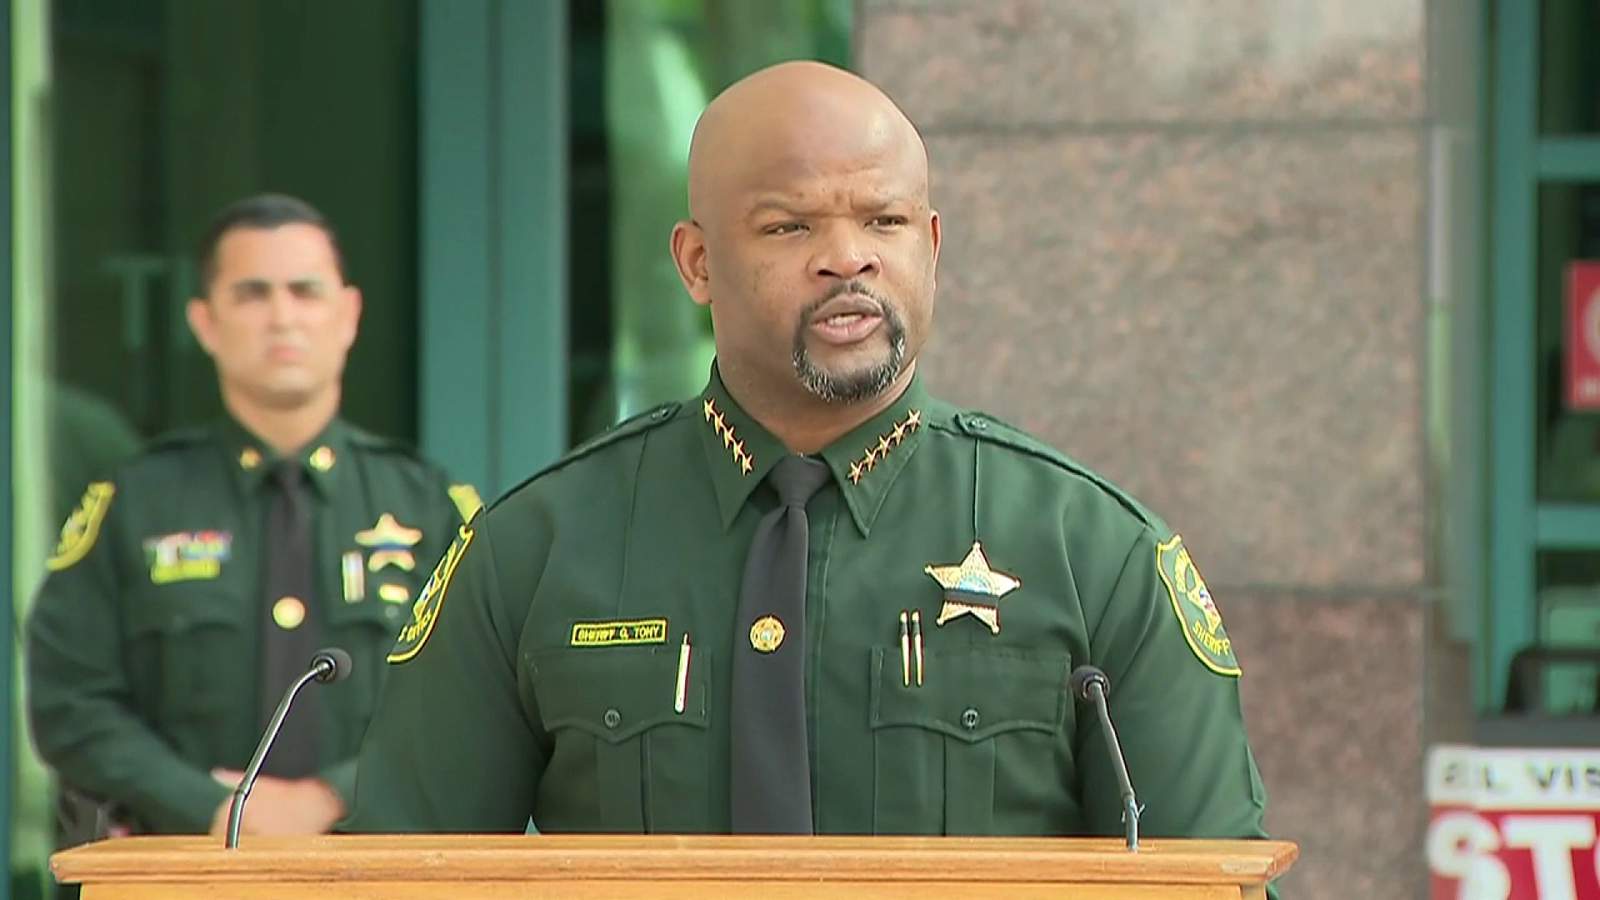 Broward County sheriff lashes out at union president over PPE controversy